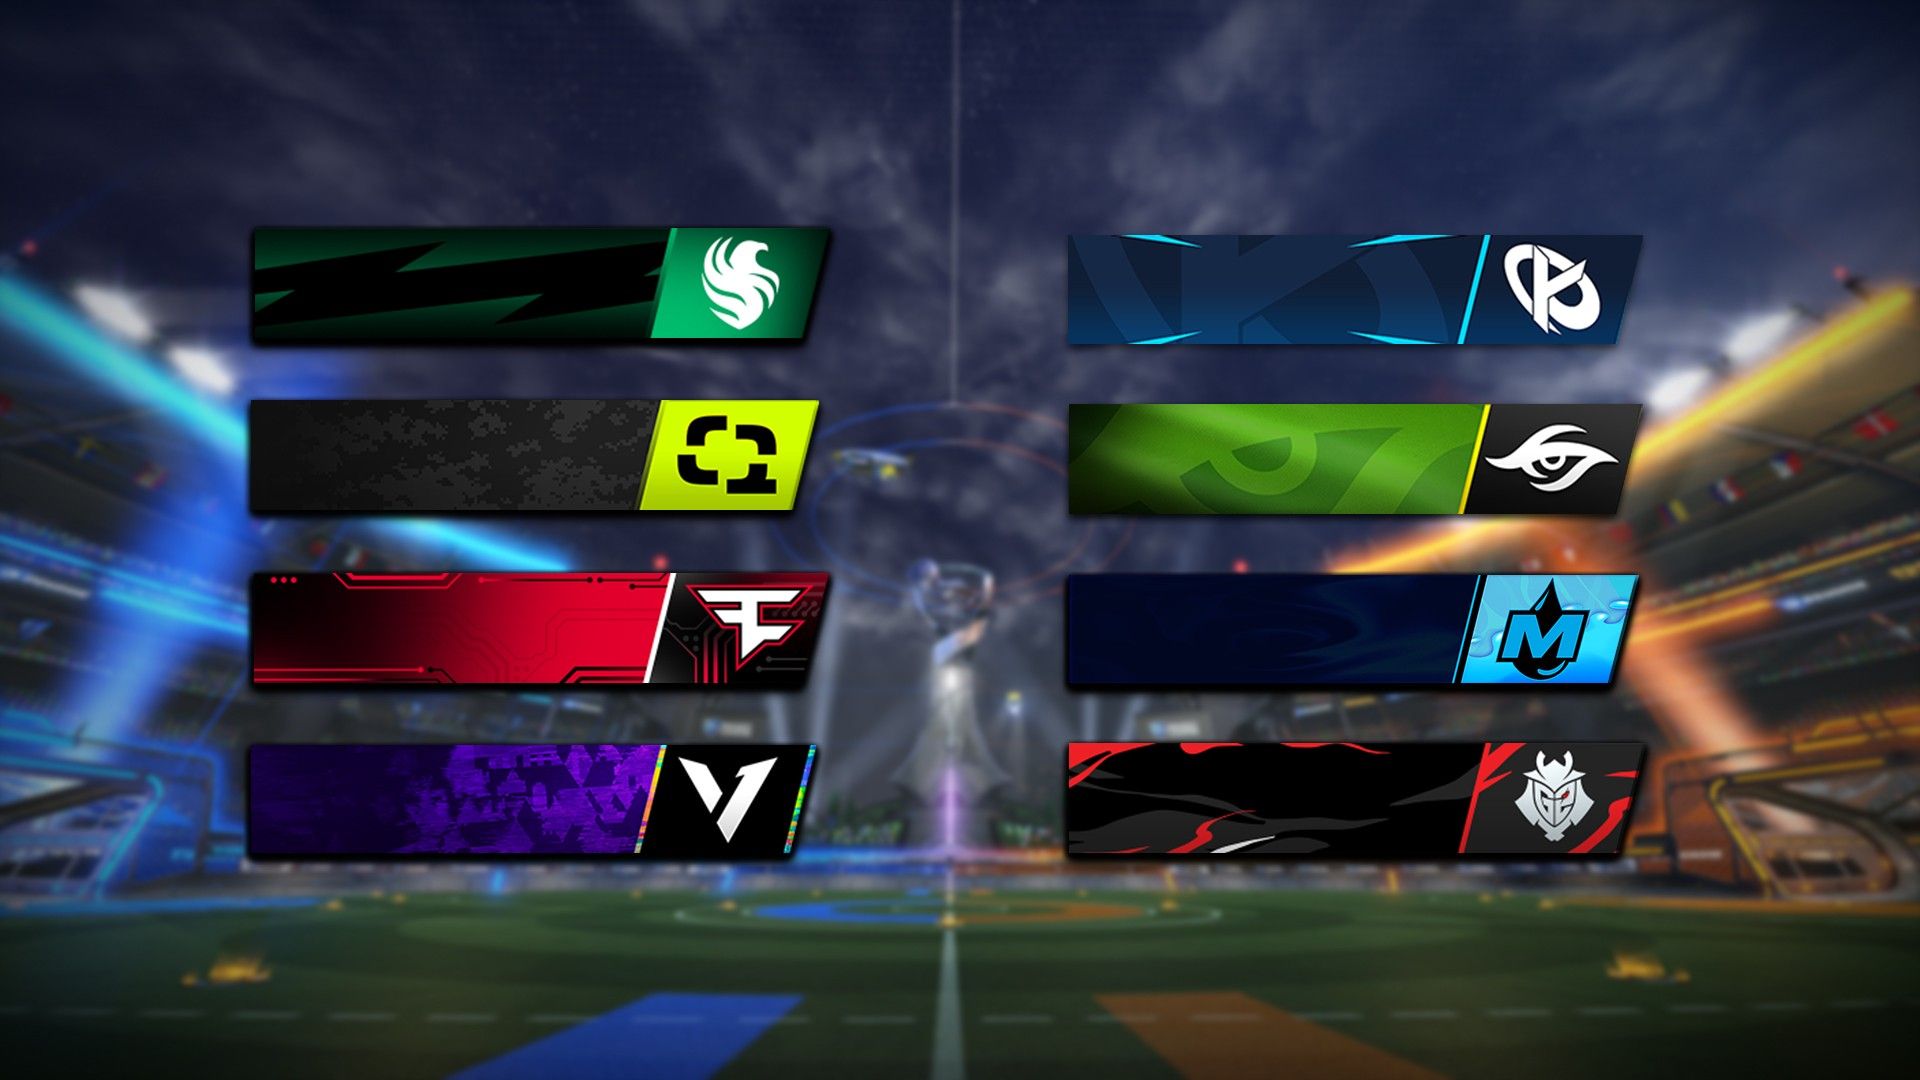 Rocket League Esports Shop Update: Check new teams and goal explosion, CHECK DETAILS